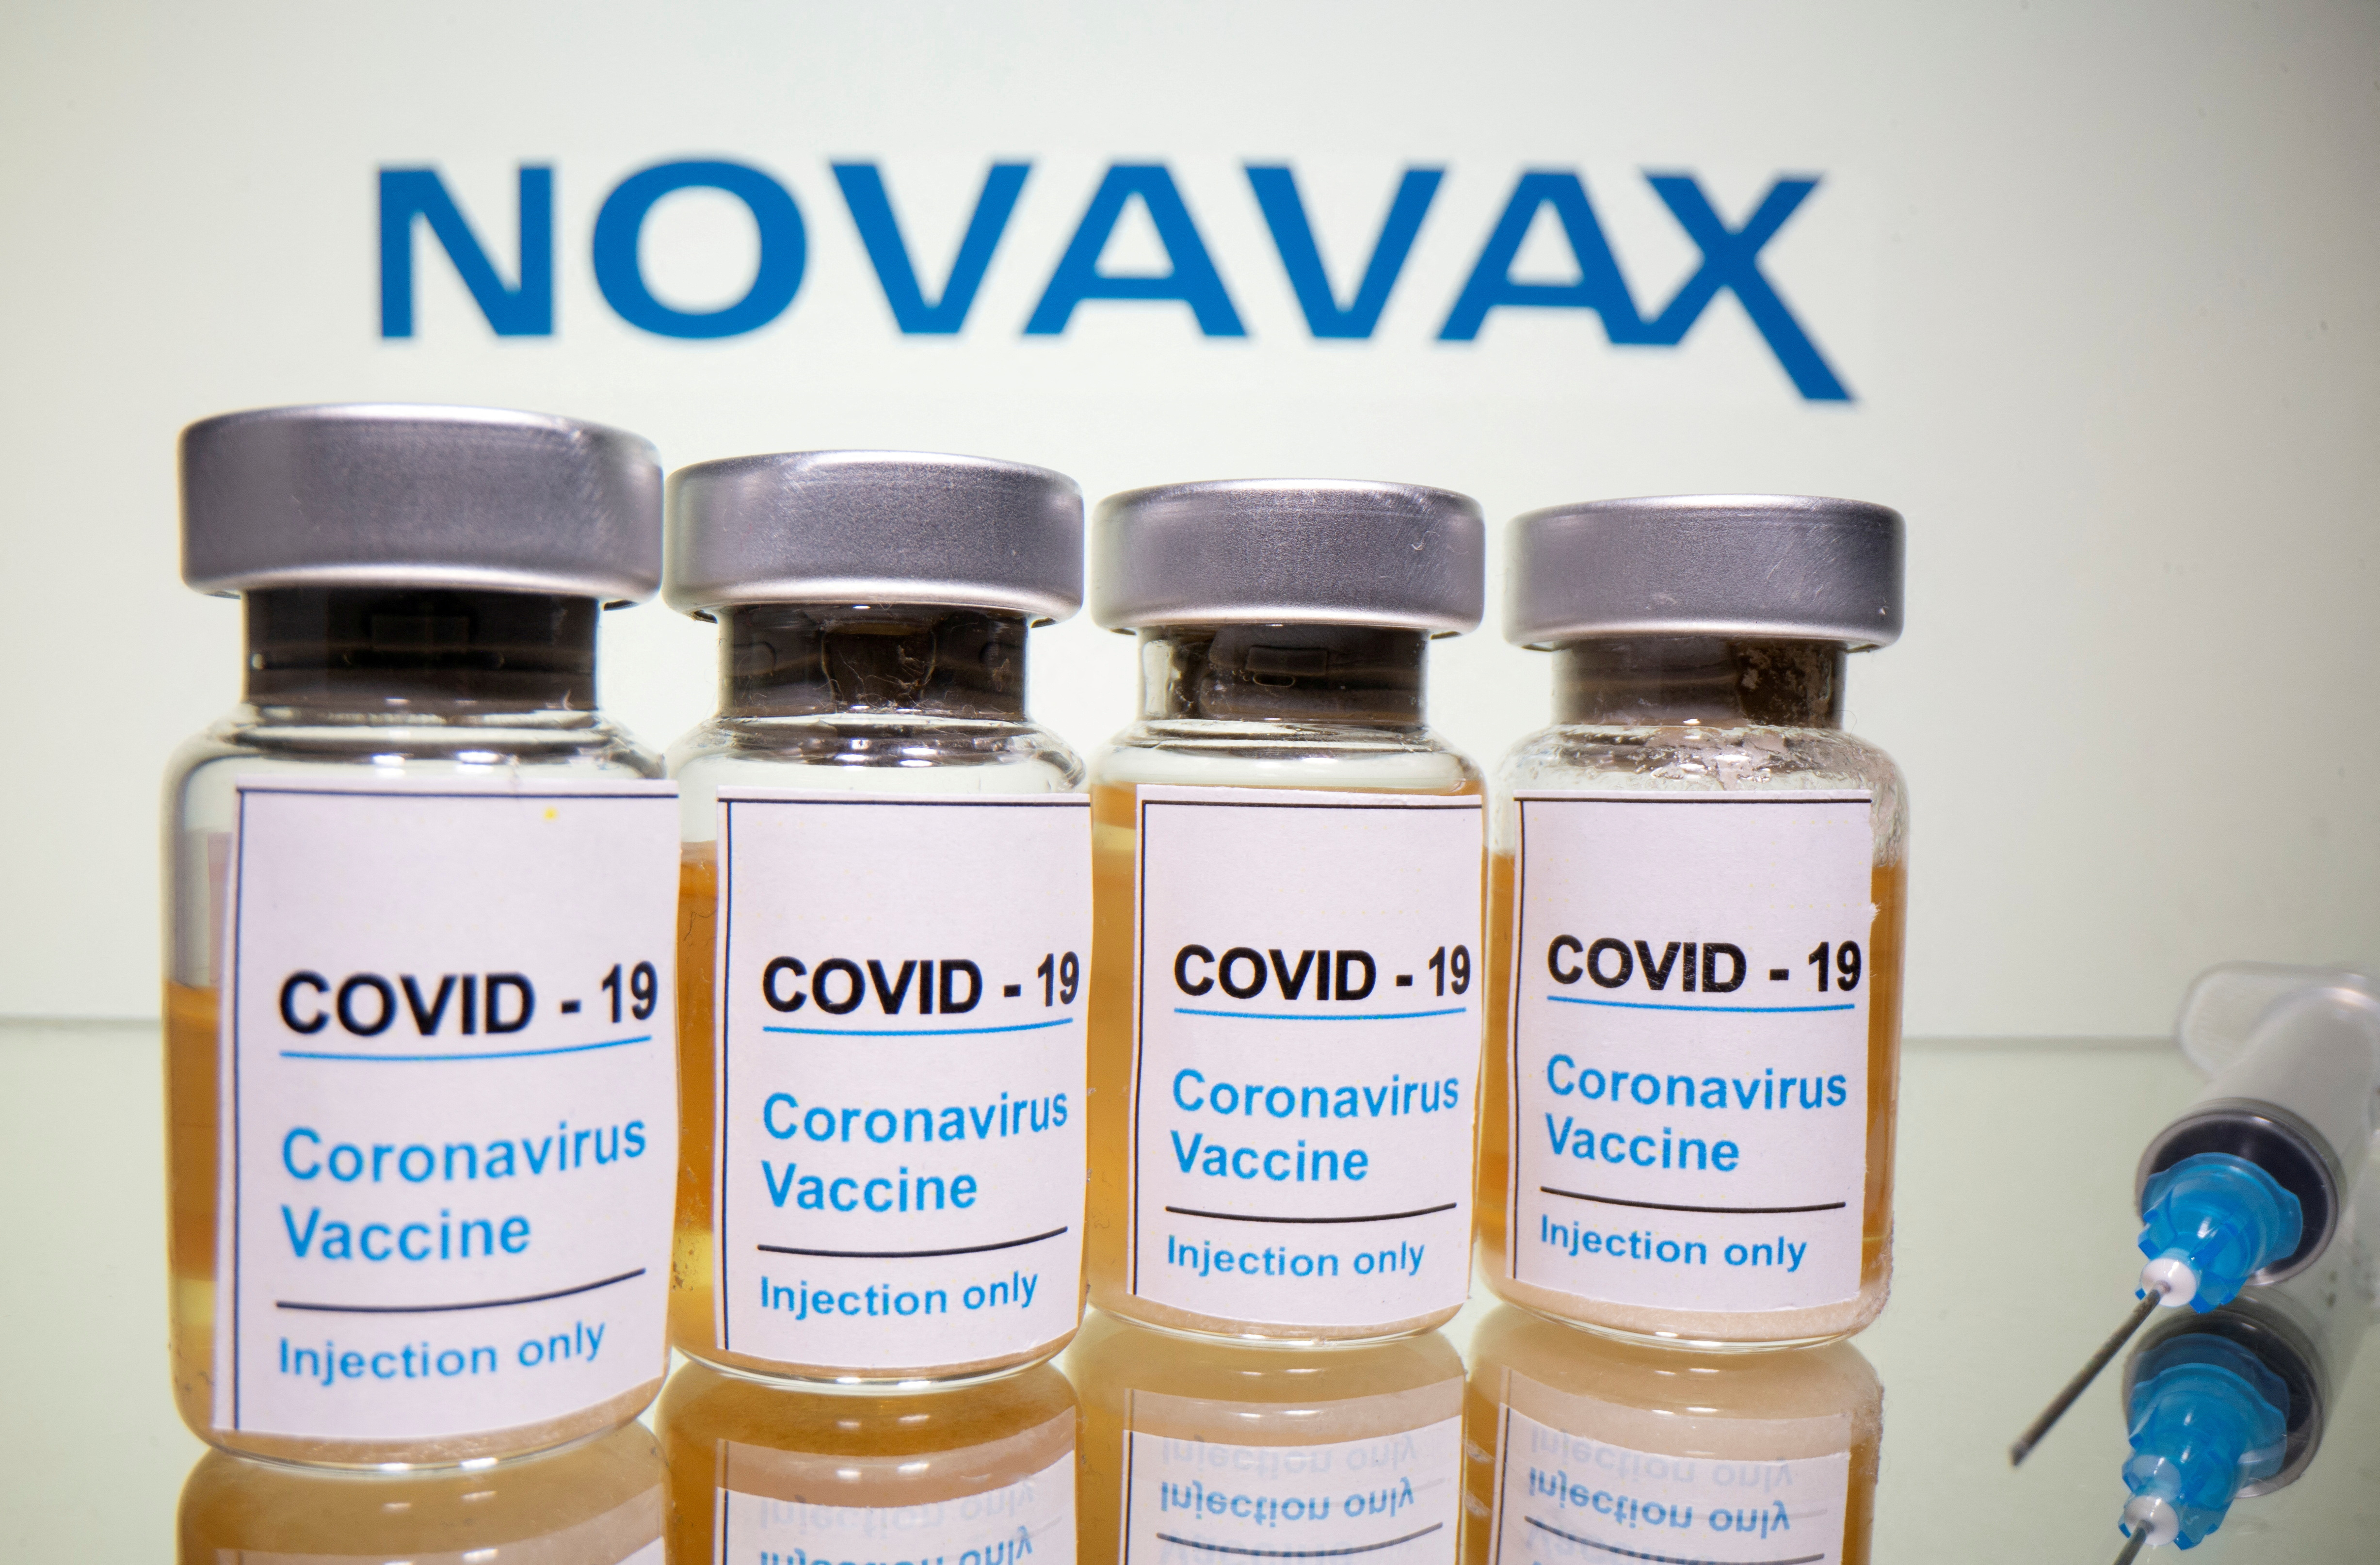 FILE PHOTO: Vials and medical syringe are seen in front of Novavax logo in this illustration